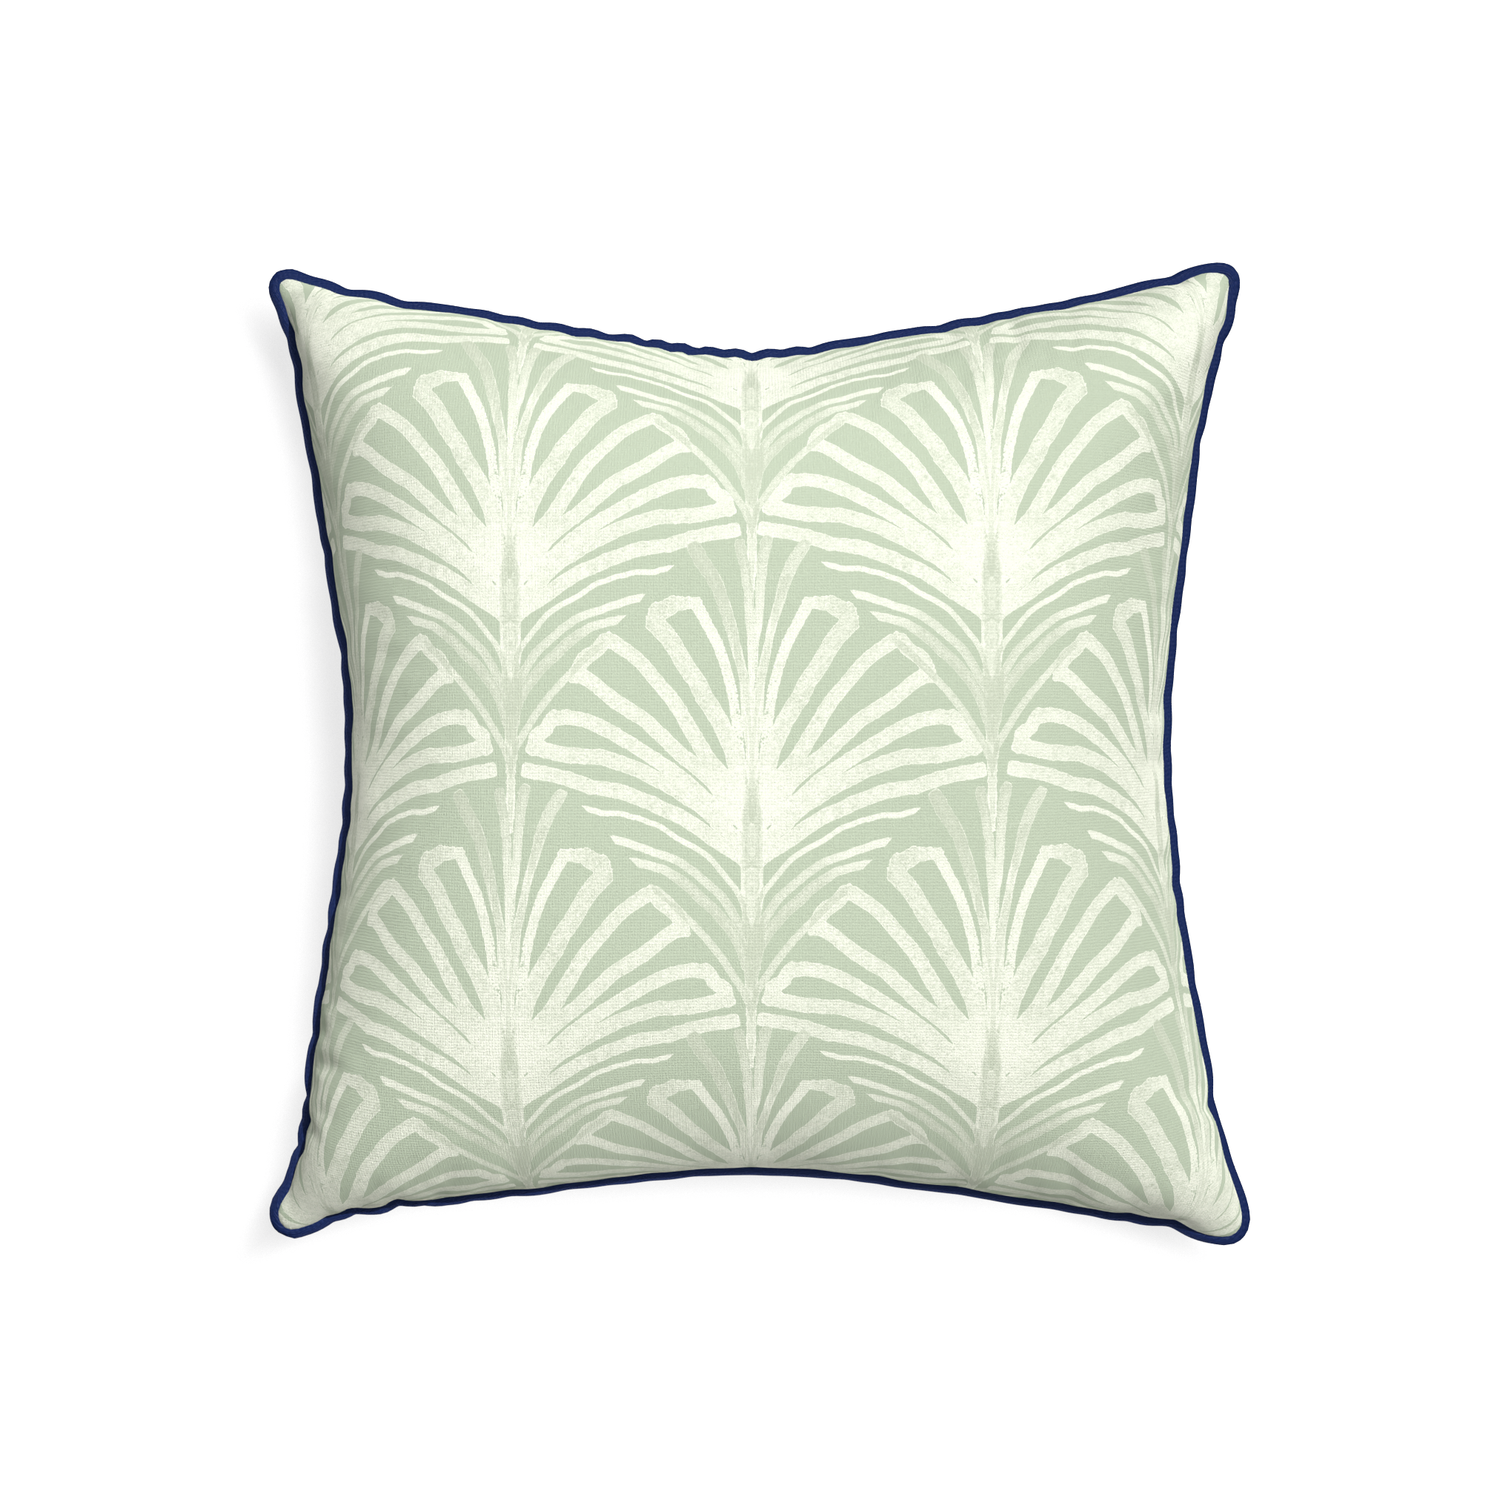 22-square suzy sage custom sage green palmpillow with midnight piping on white background